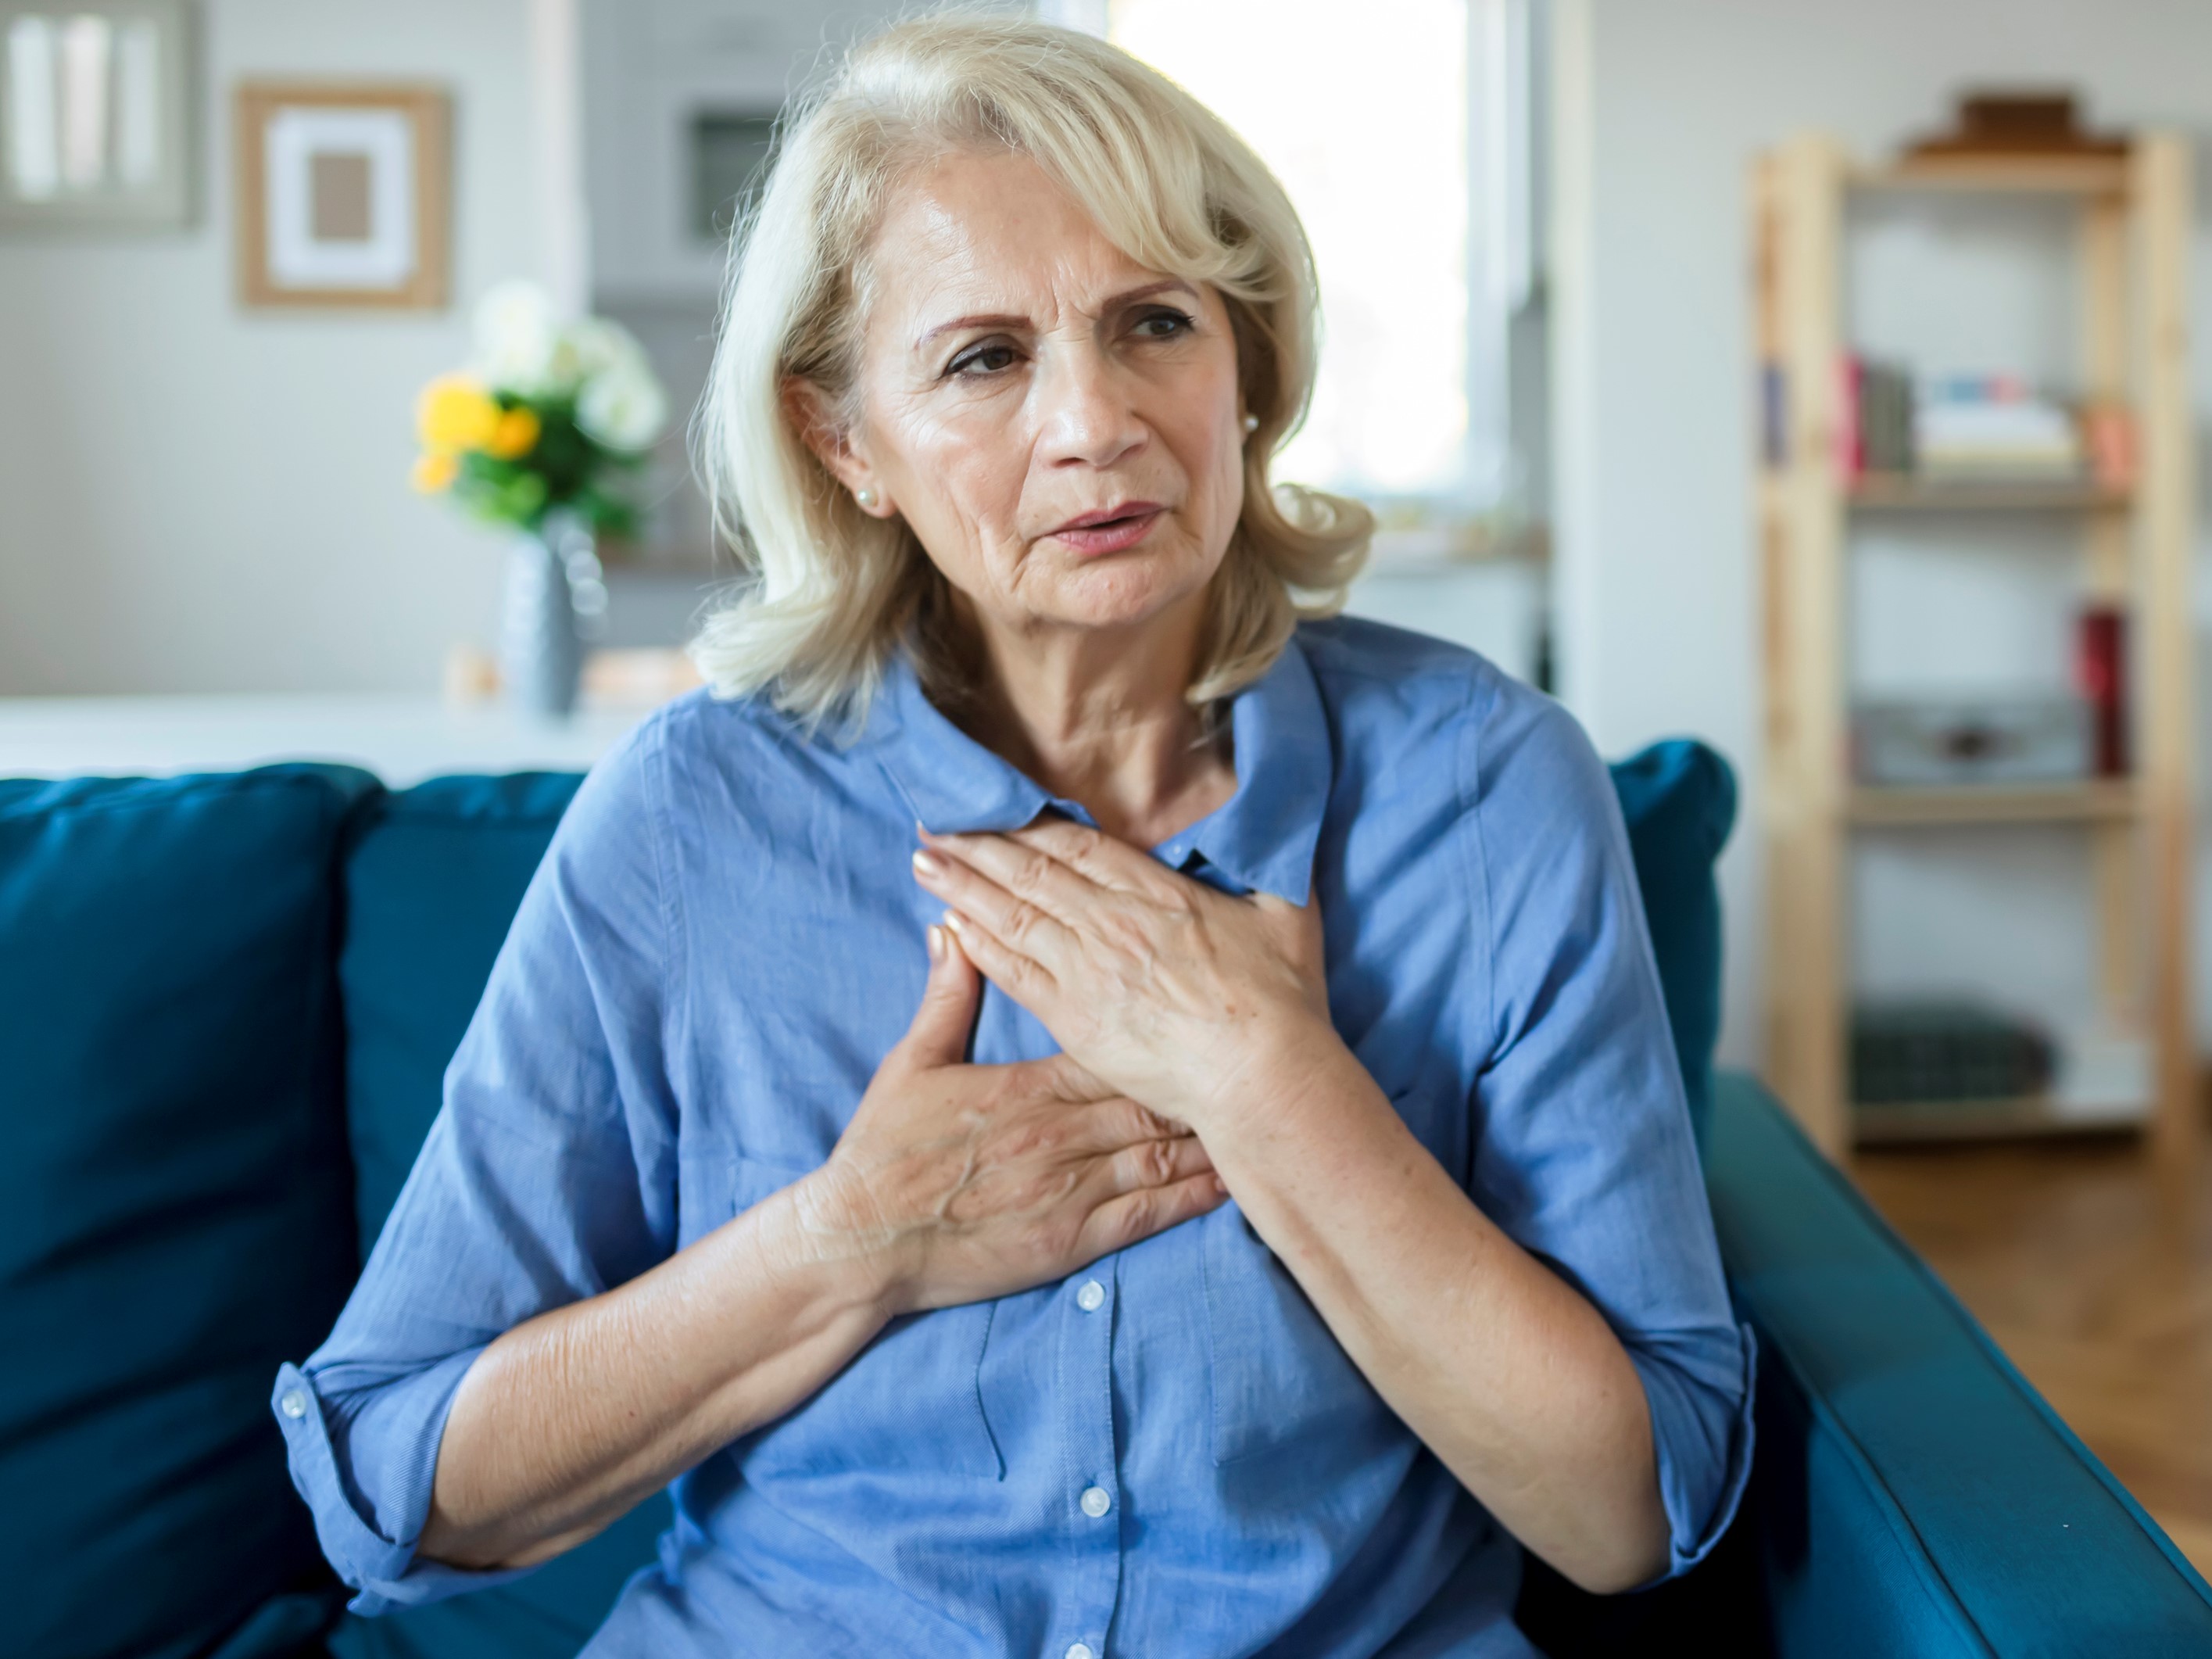 Woman looking stressed with hands on chest